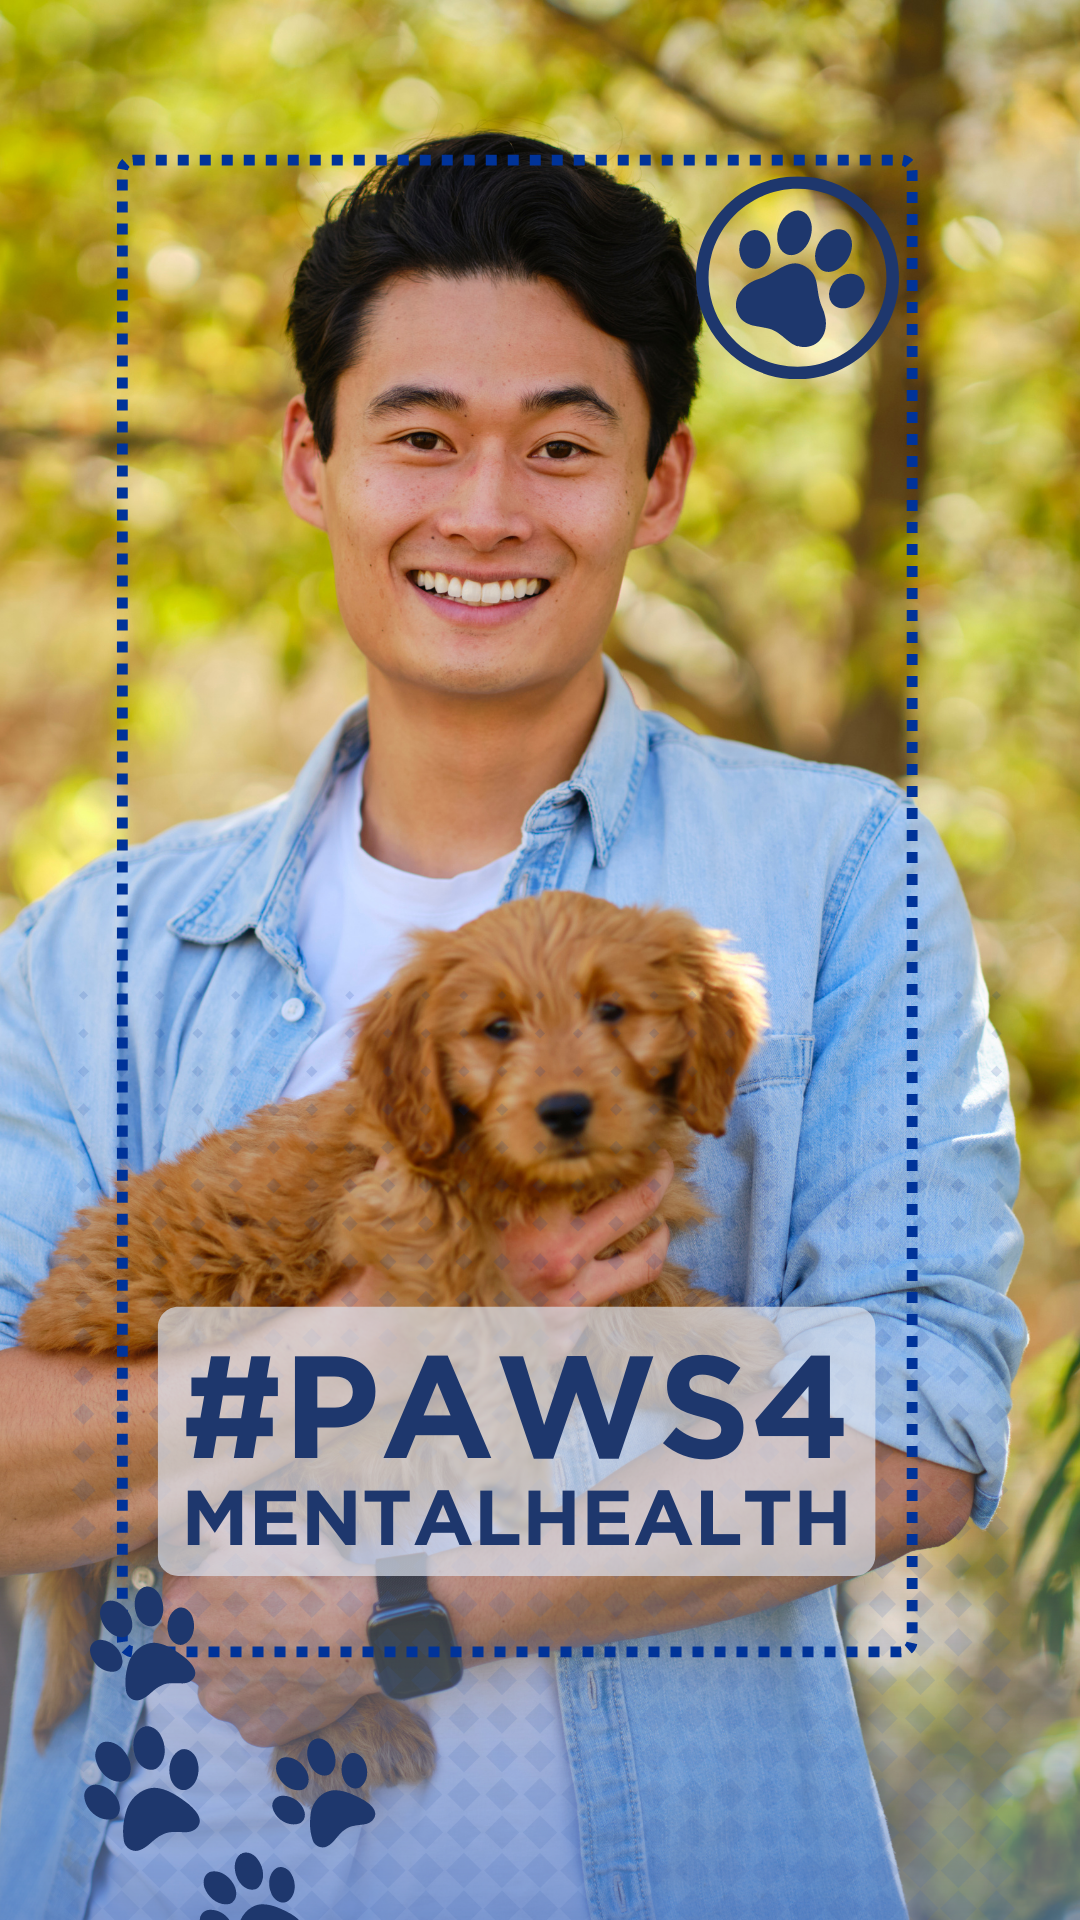 man holding a small dog with #paws4mentalhealth hashtag